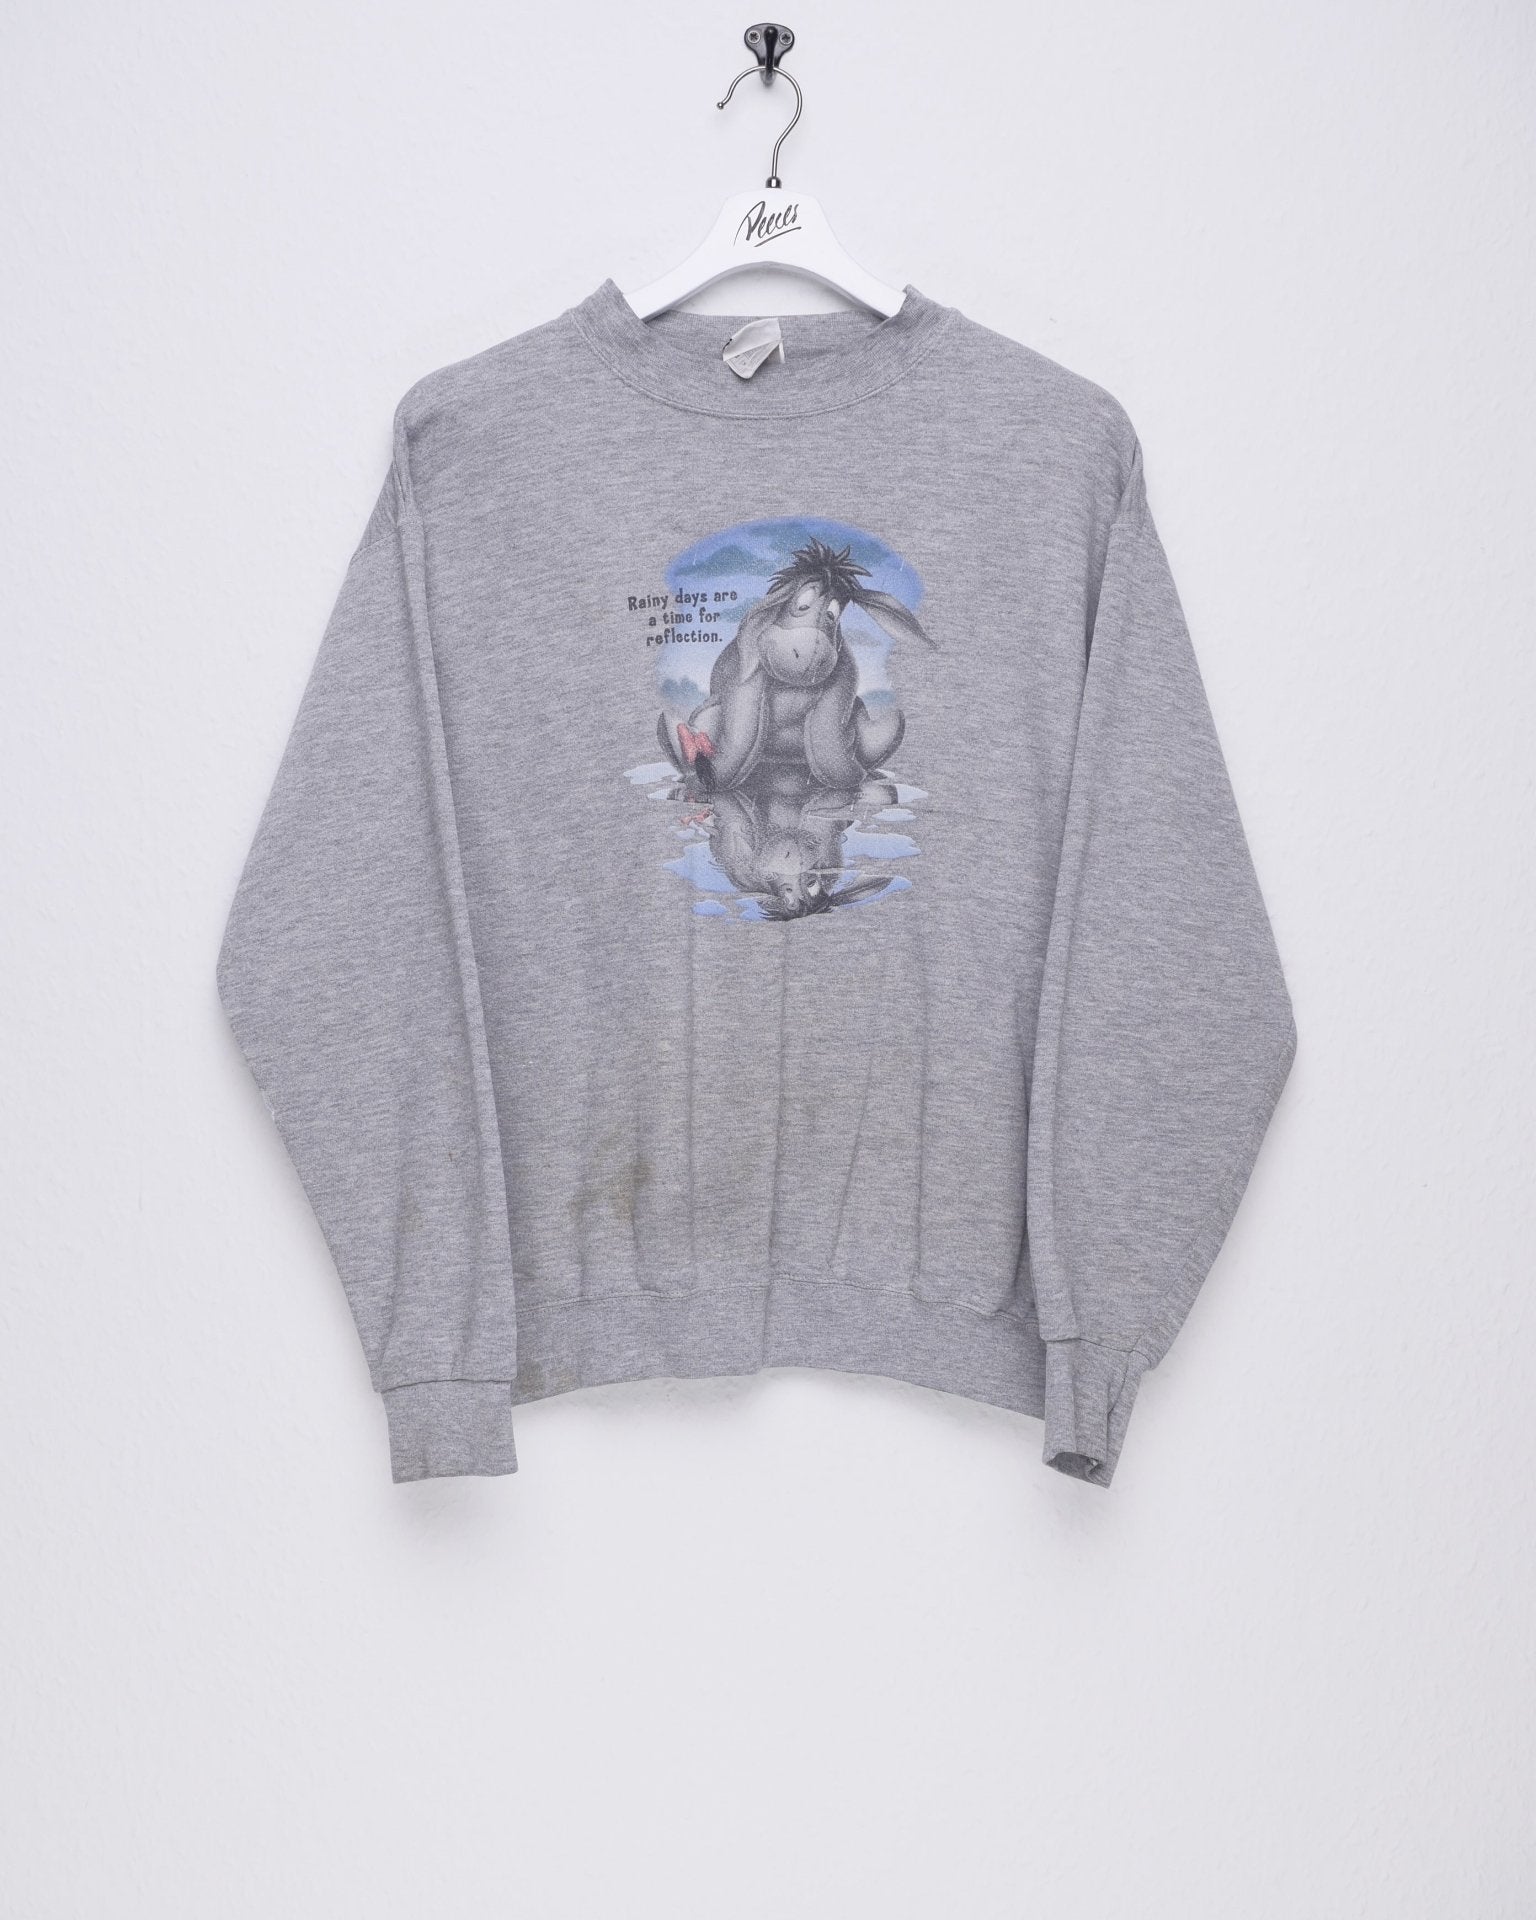 disney Eeyore 'Rany Days area Time for Reflection' printed Graphic Sweater - Peeces